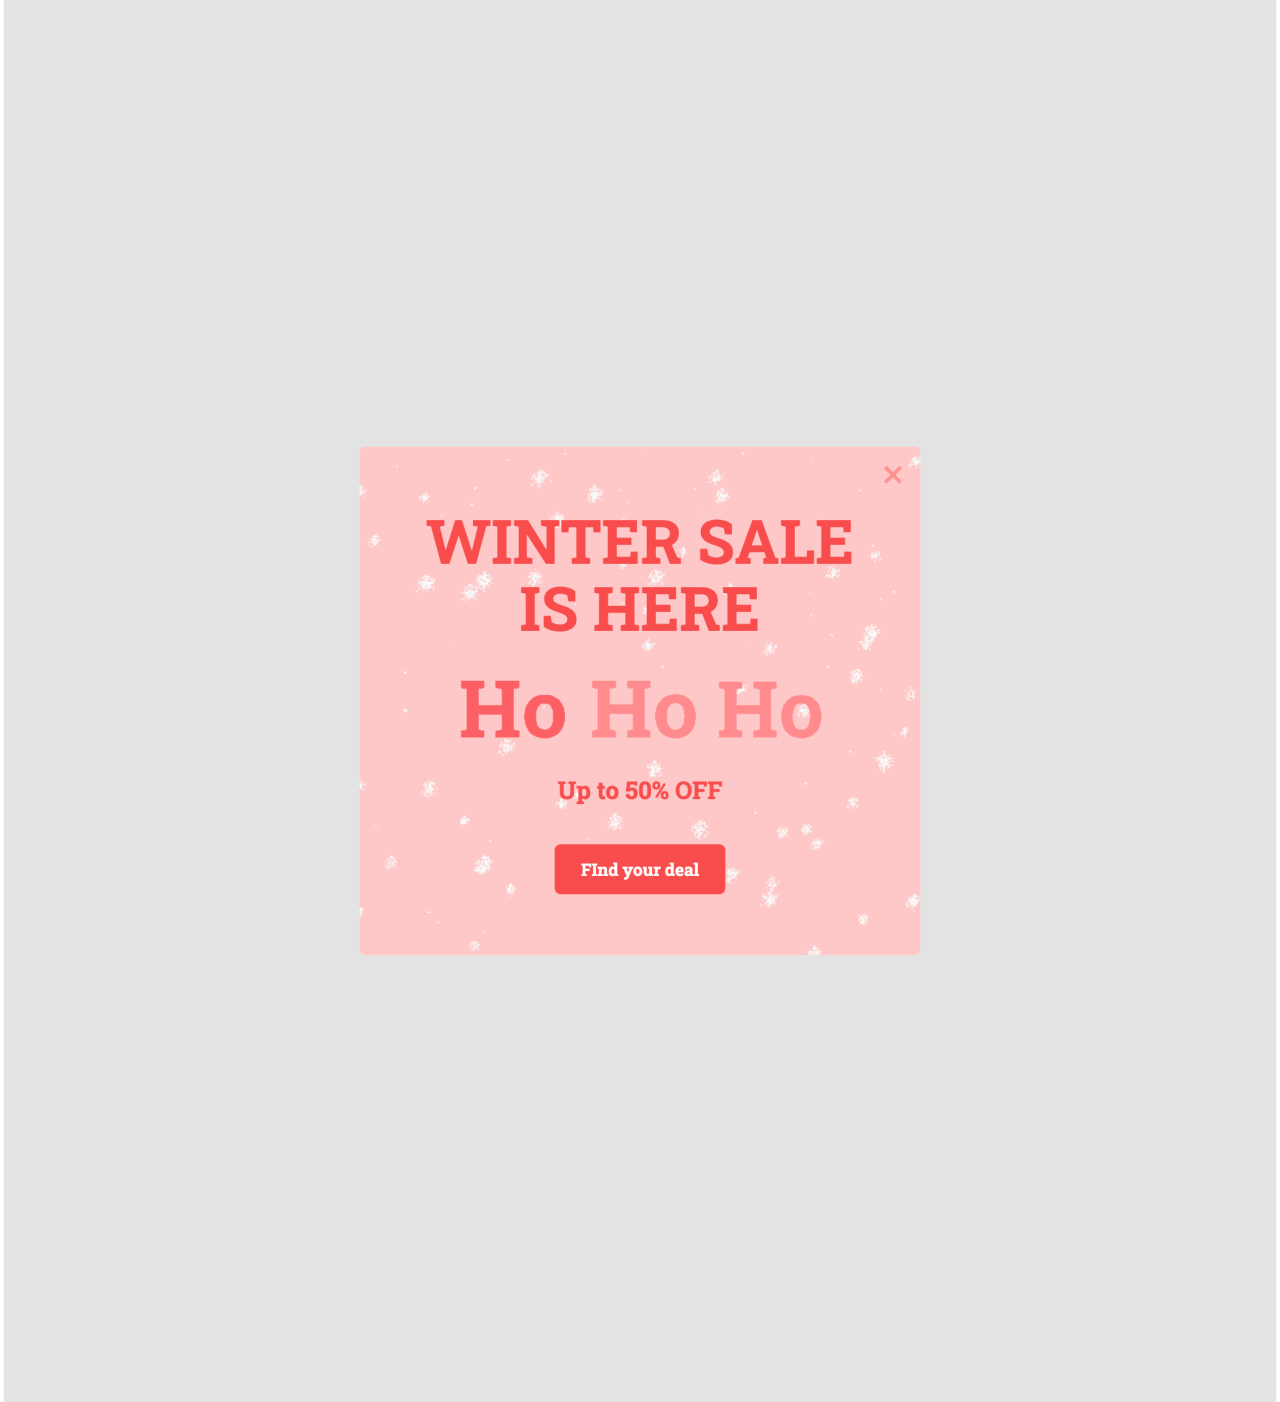 Winter promo sale template - Made by MailerLite